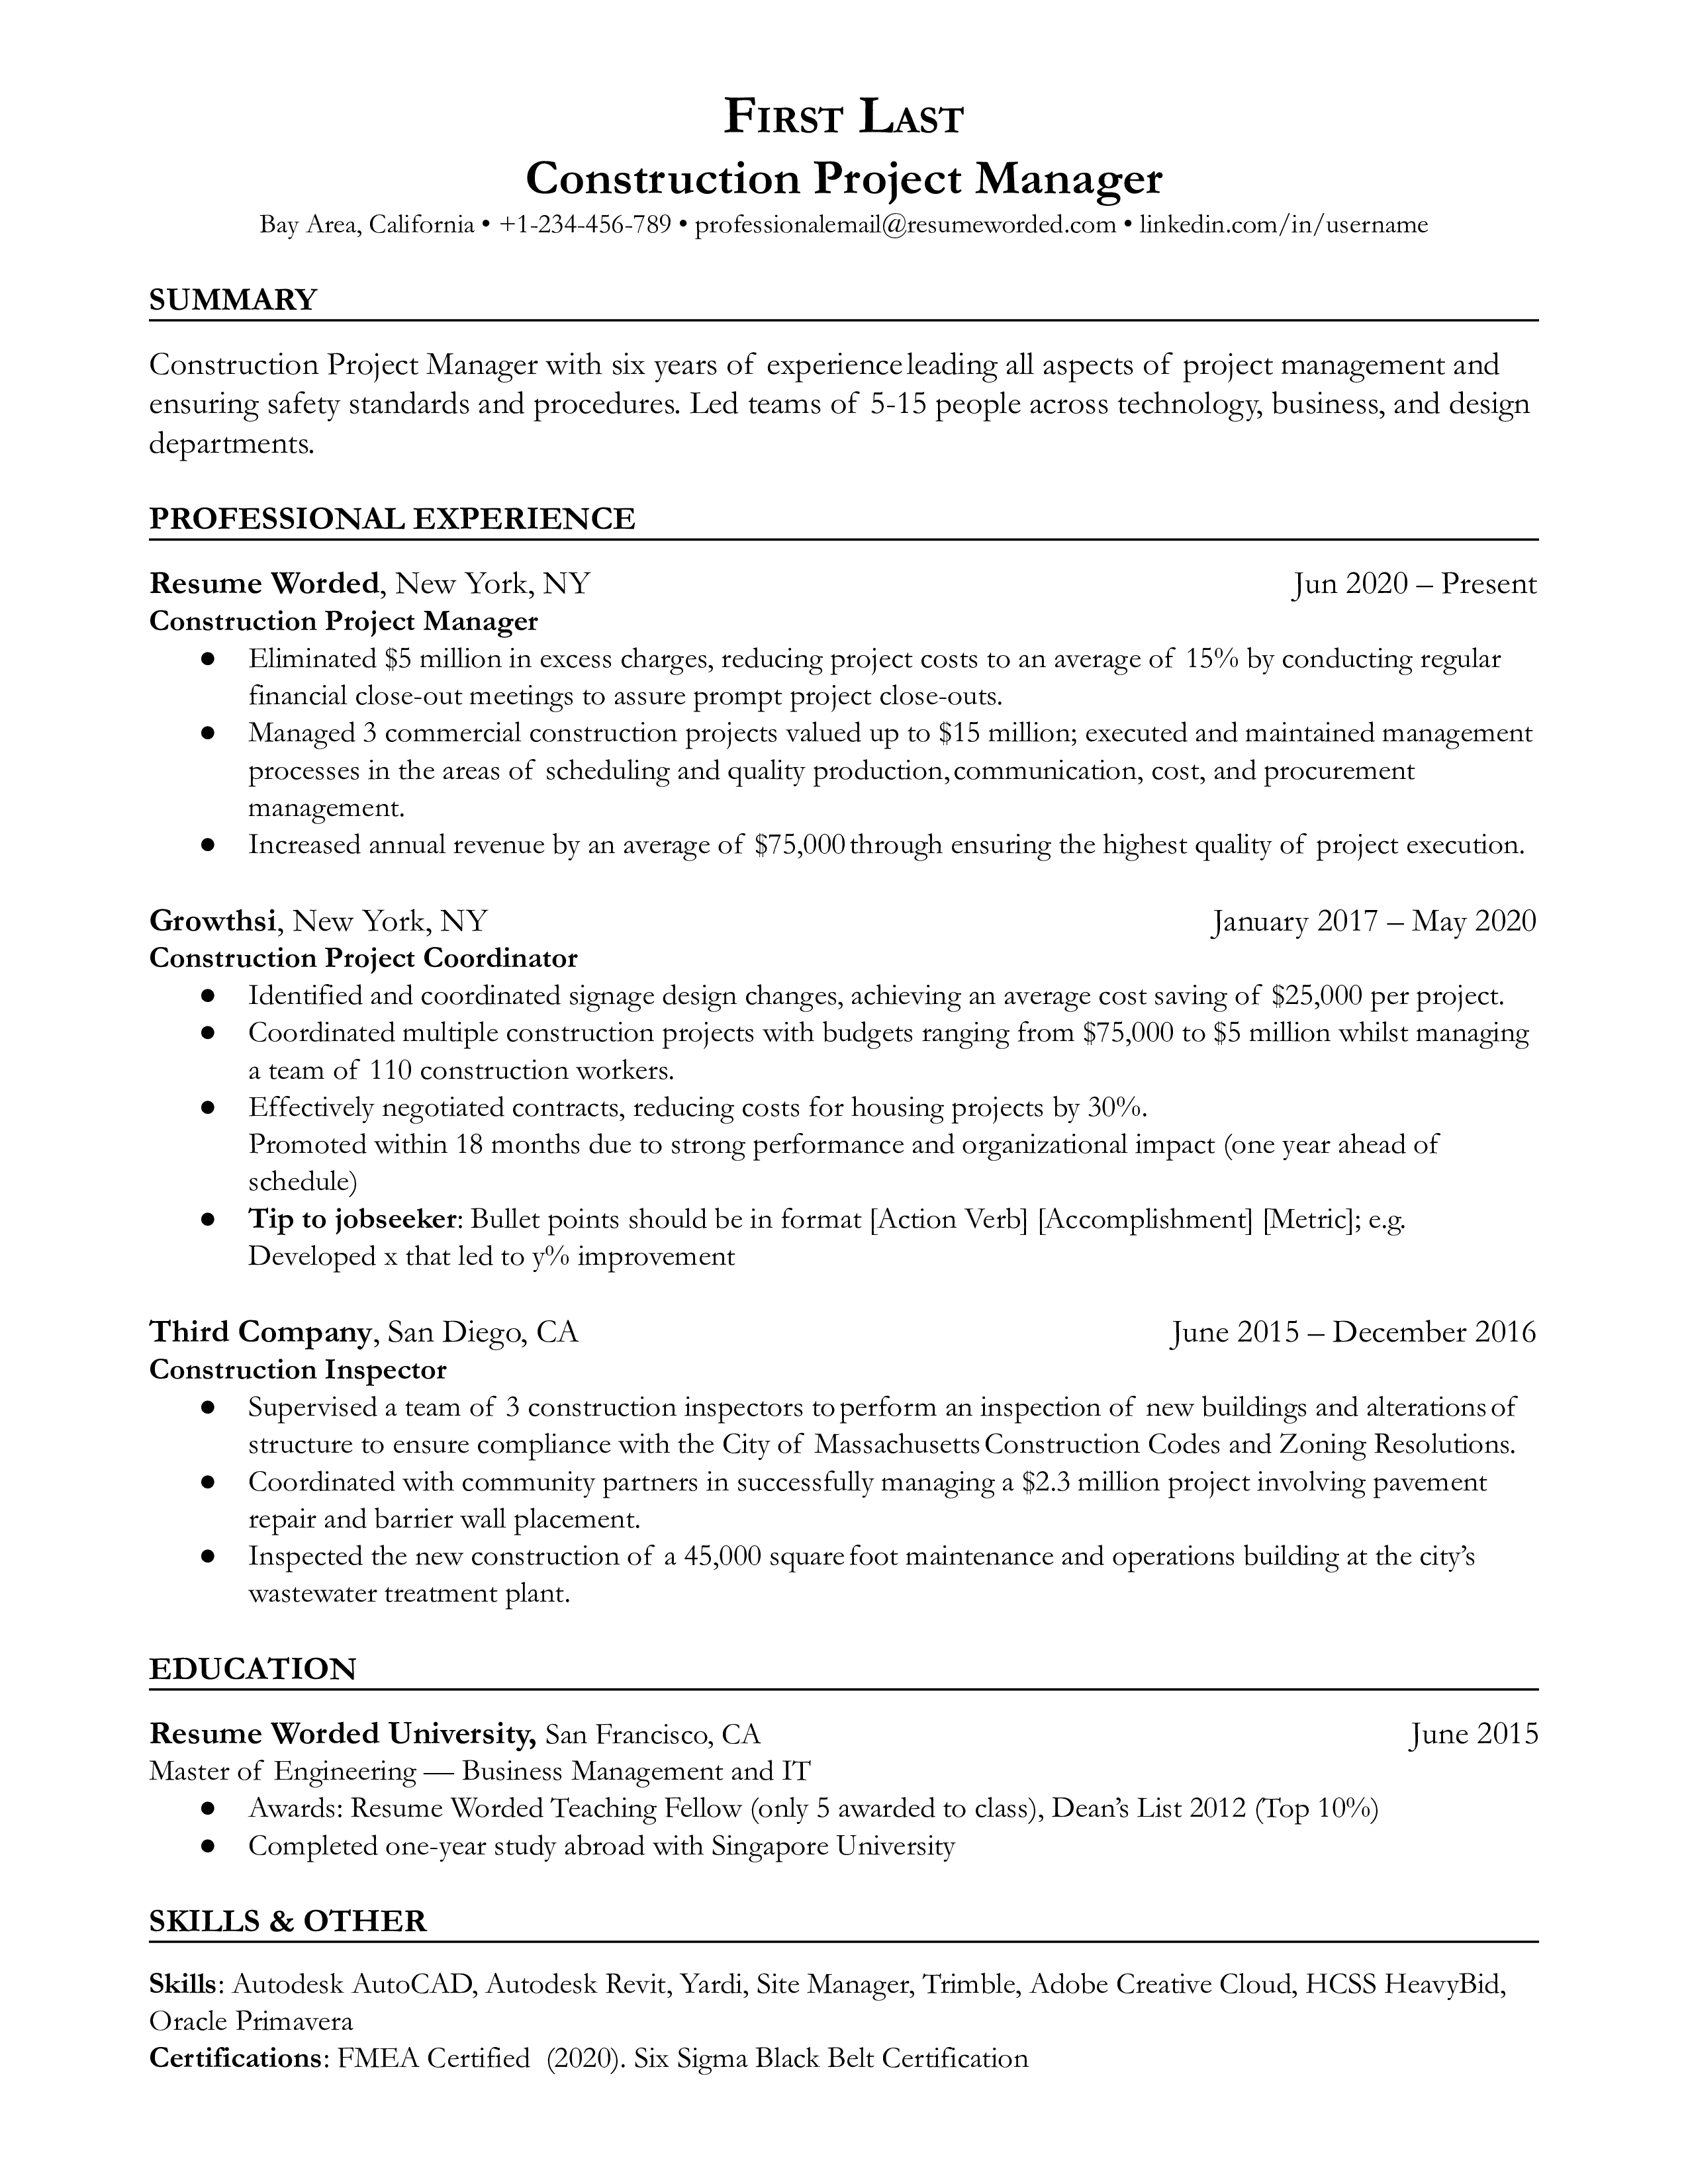 A Construction Project Manager resume template showing the applicant's expertise in project management.